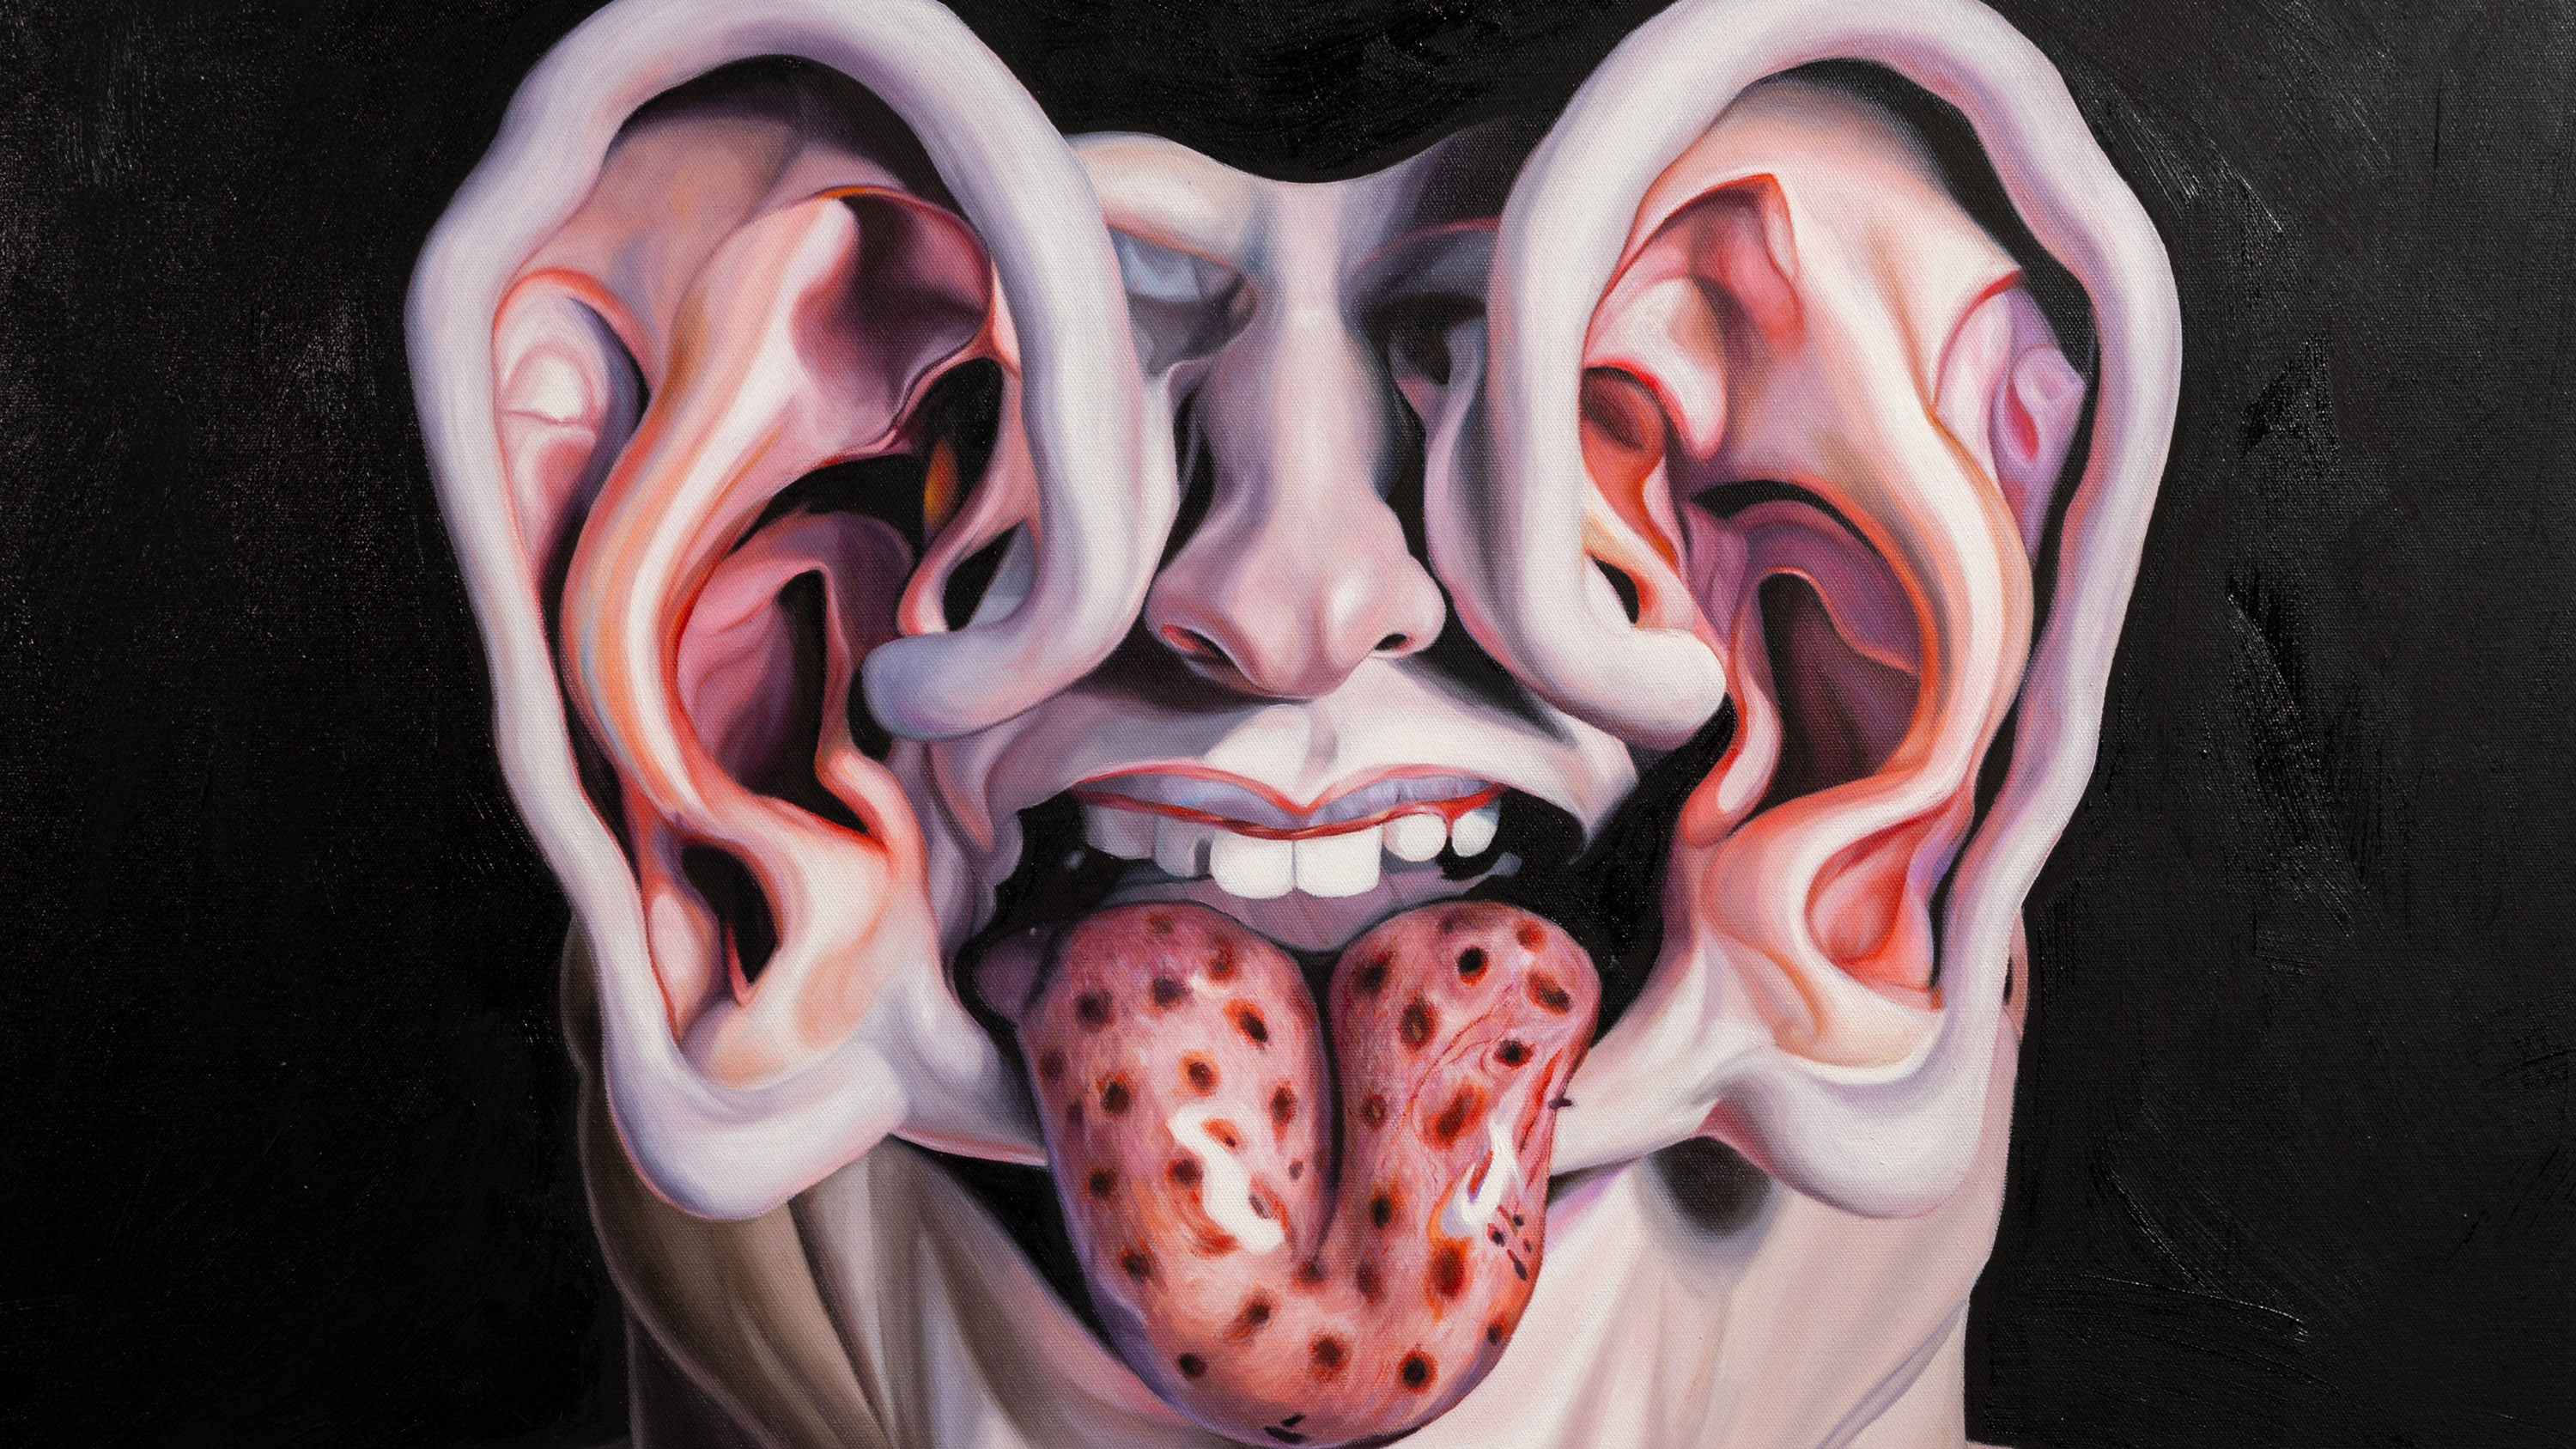 detail from painting of deformed head where massive ears on the front of the face block the eys and a glossy strawberry textured tongue protrudes from the open mouth.